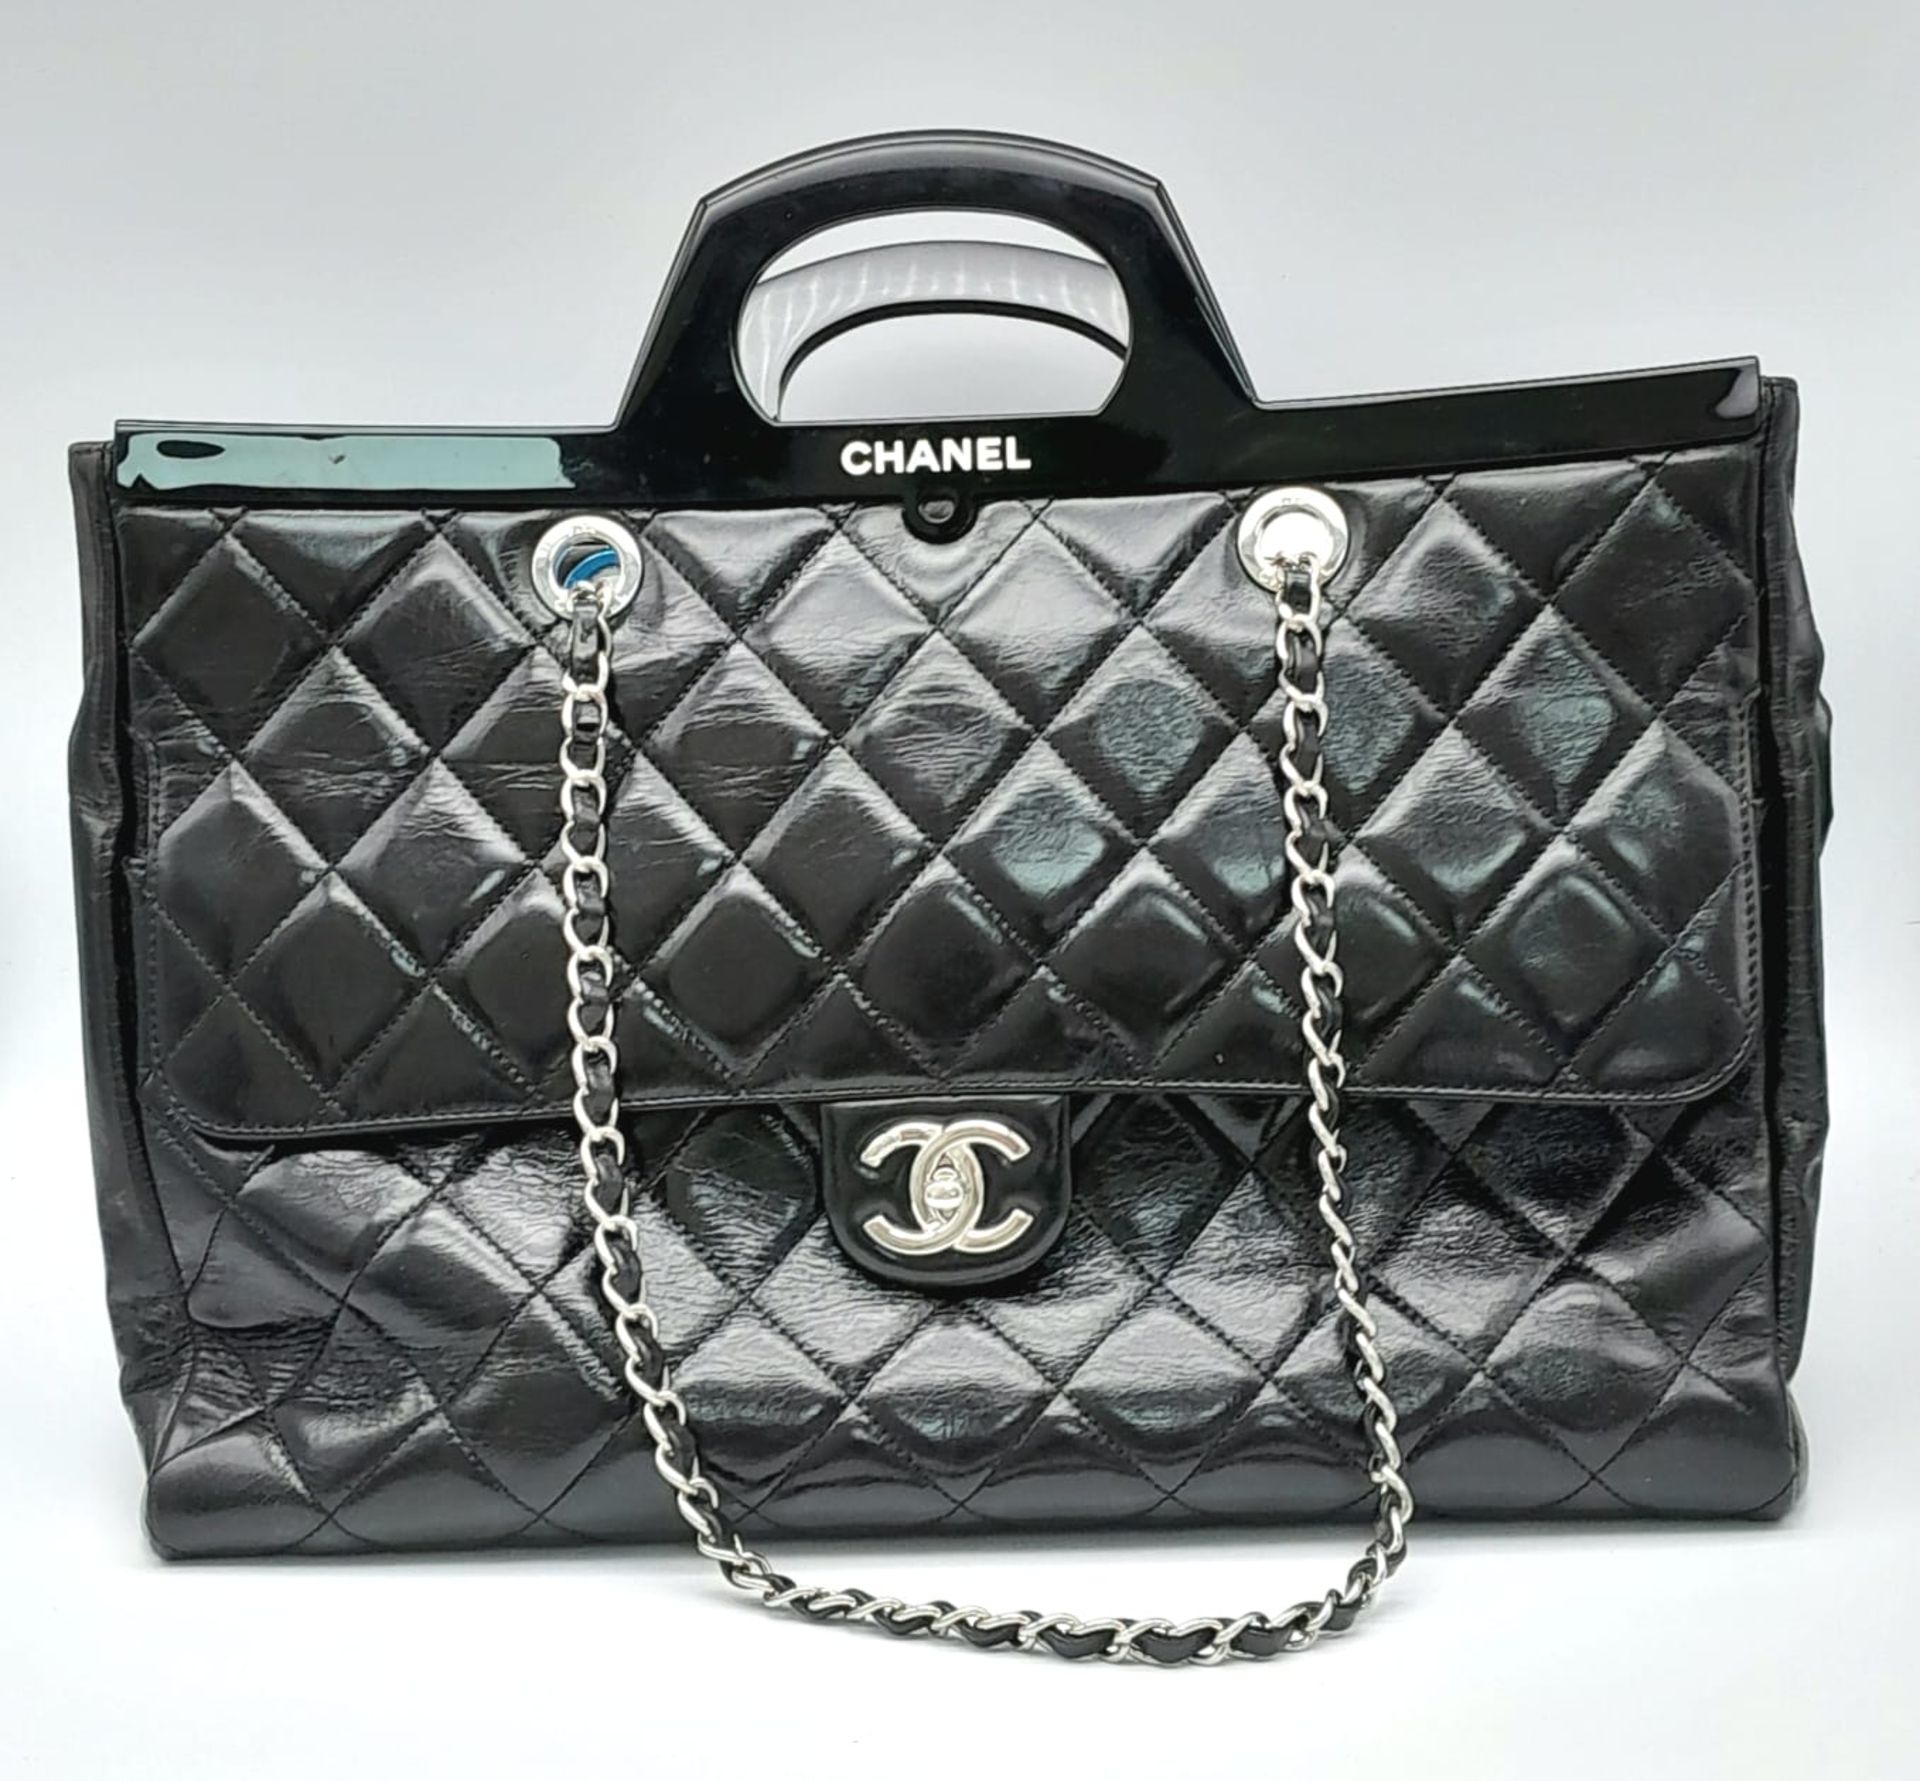 A CHANEL CC DELIVERY TOTE BAG. EXTERIOR SLIP POCKET, 2X INTERIOR SLIP POCKETS, ONE INTERIOR ZIP